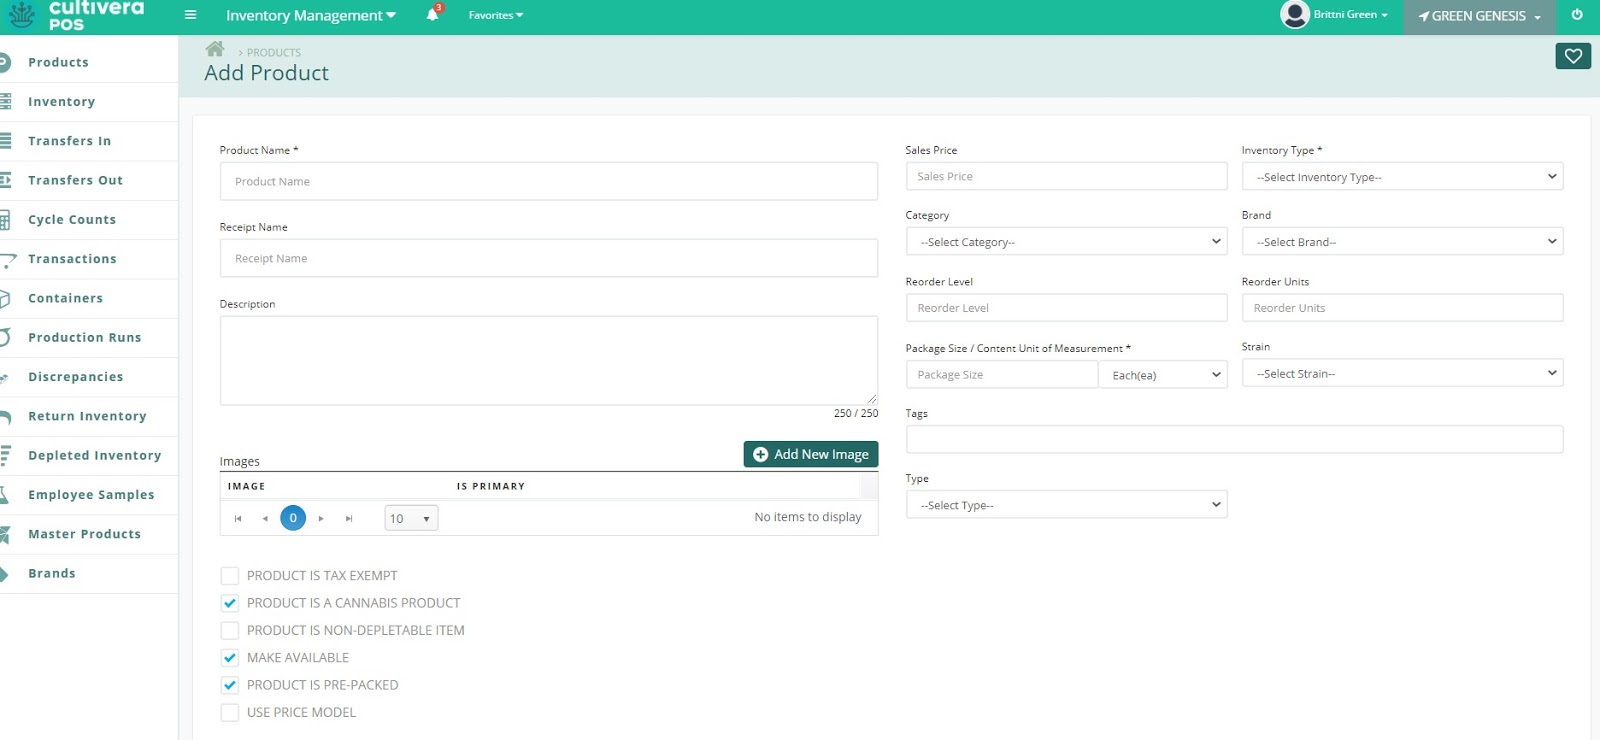 Add Product screen in cultivera point of sale inventory management module